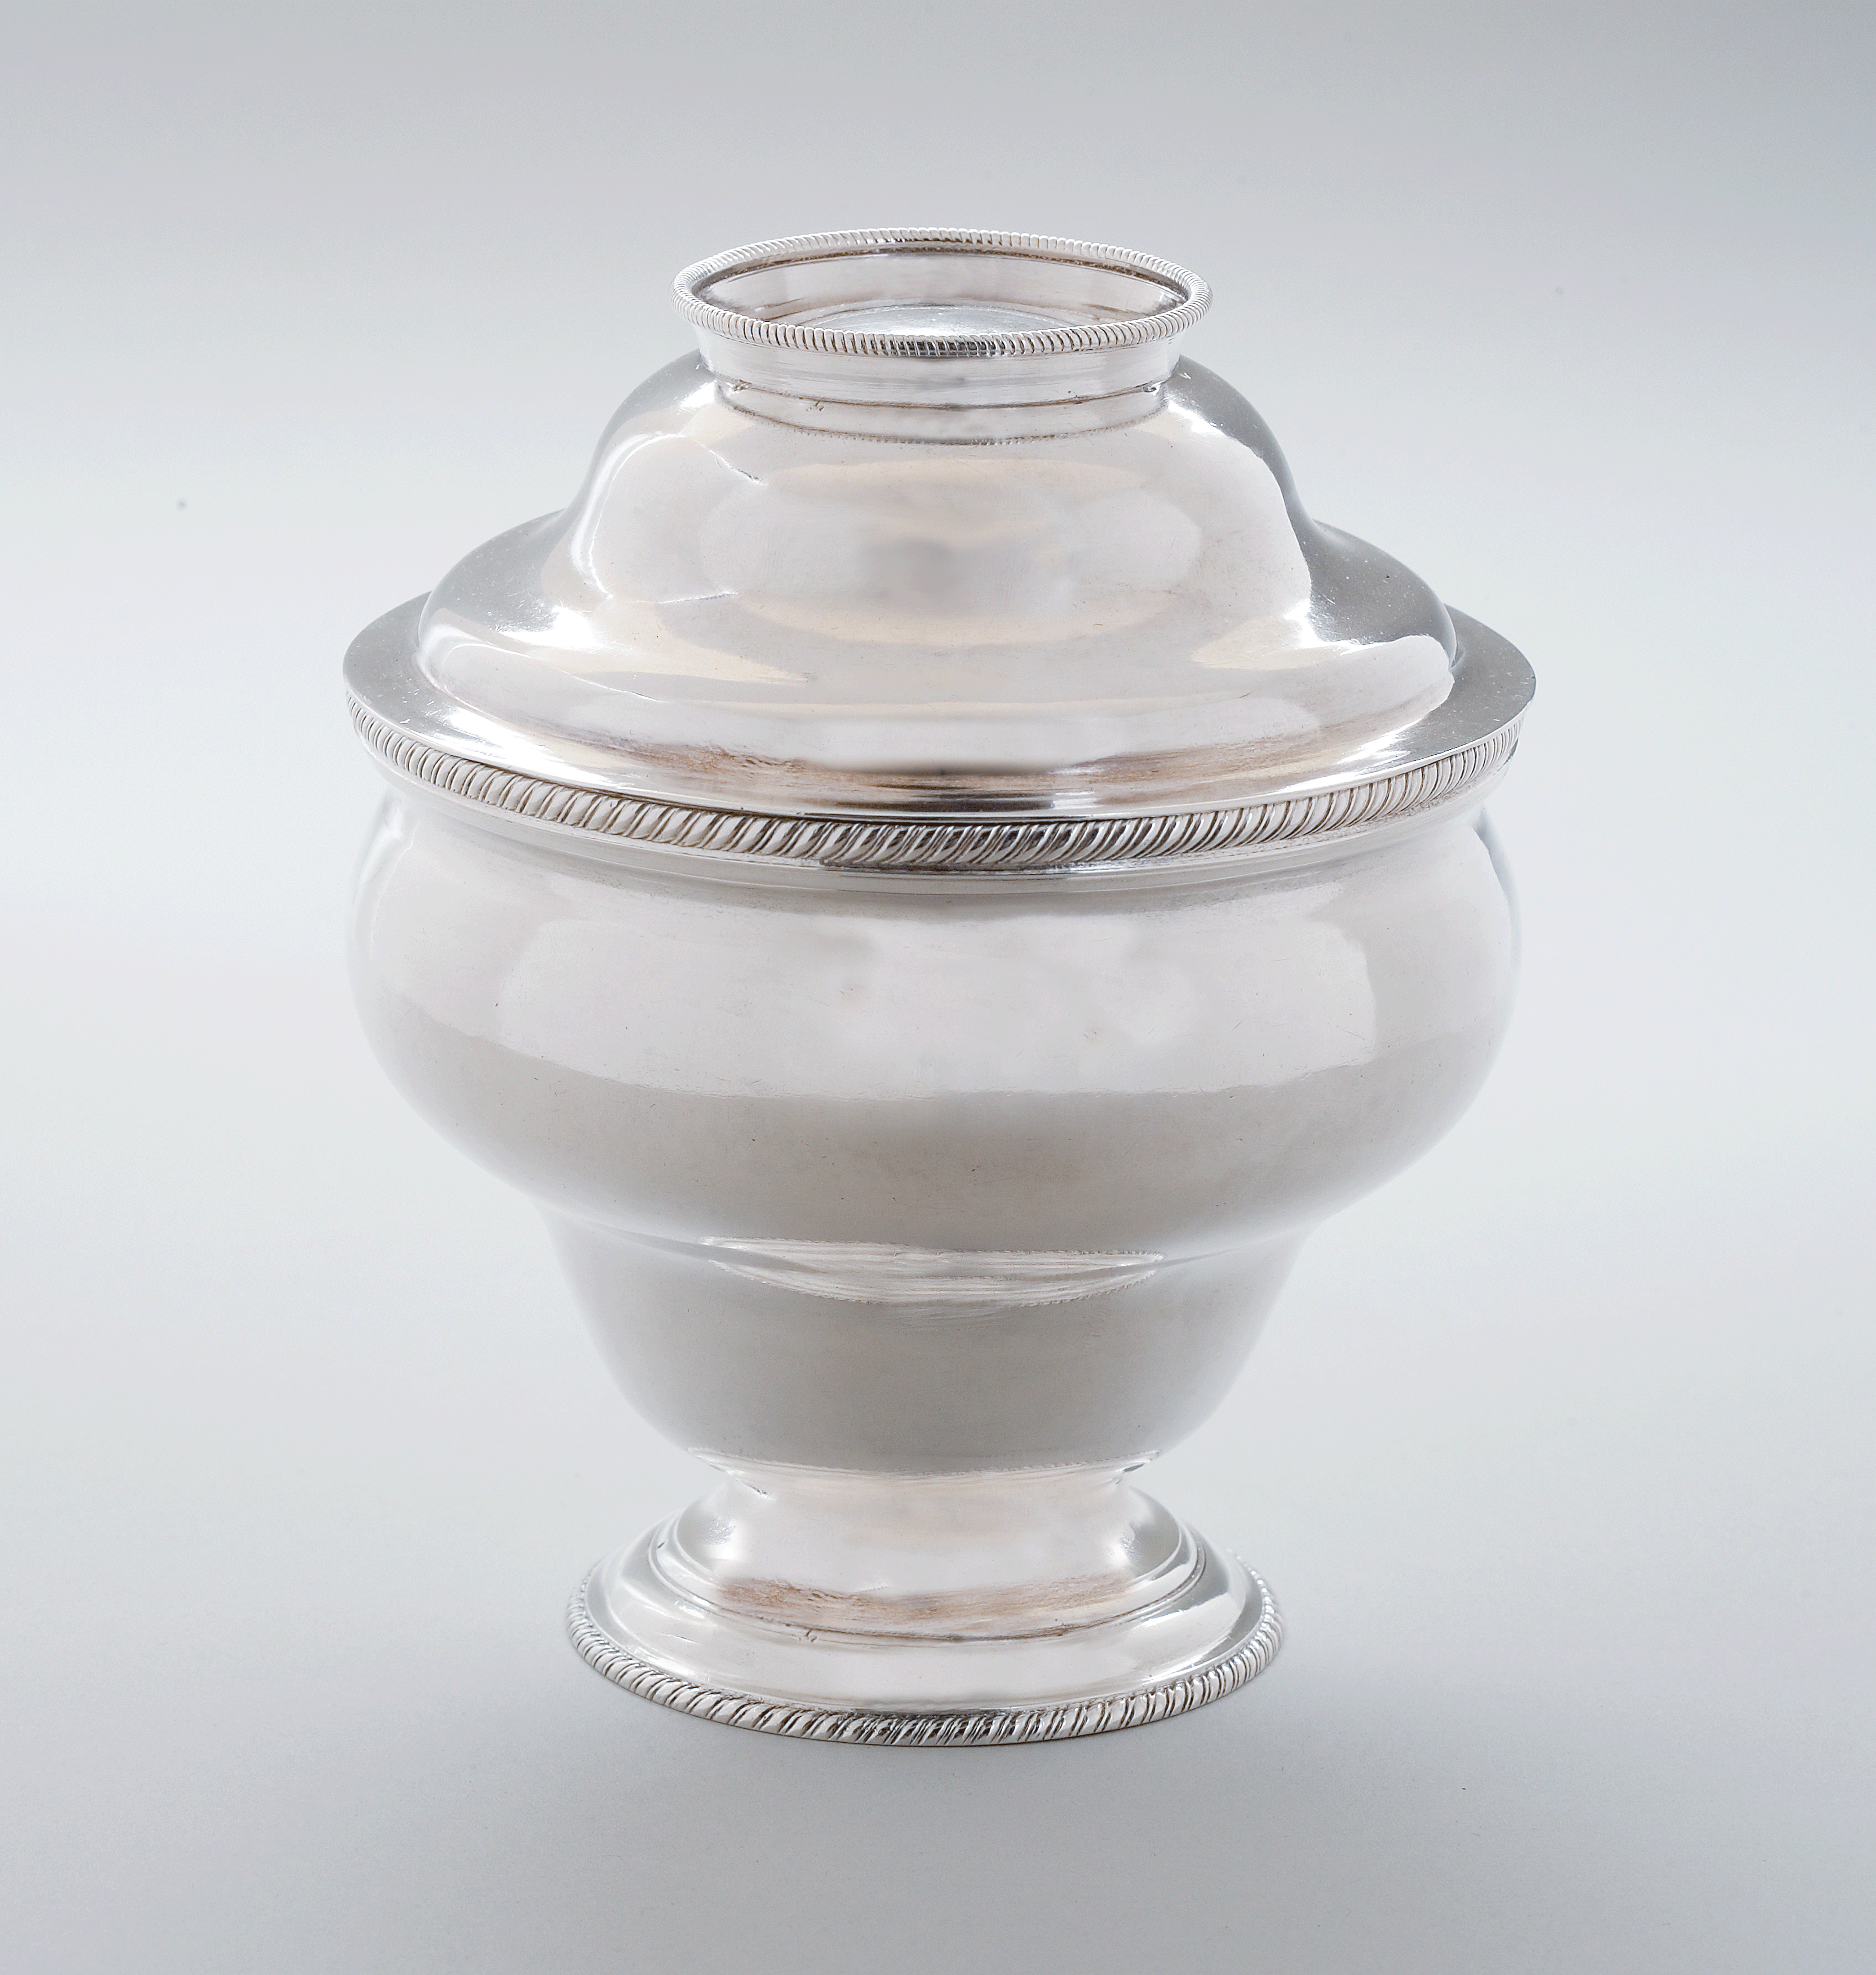 Early American Covered Sugar Bowl